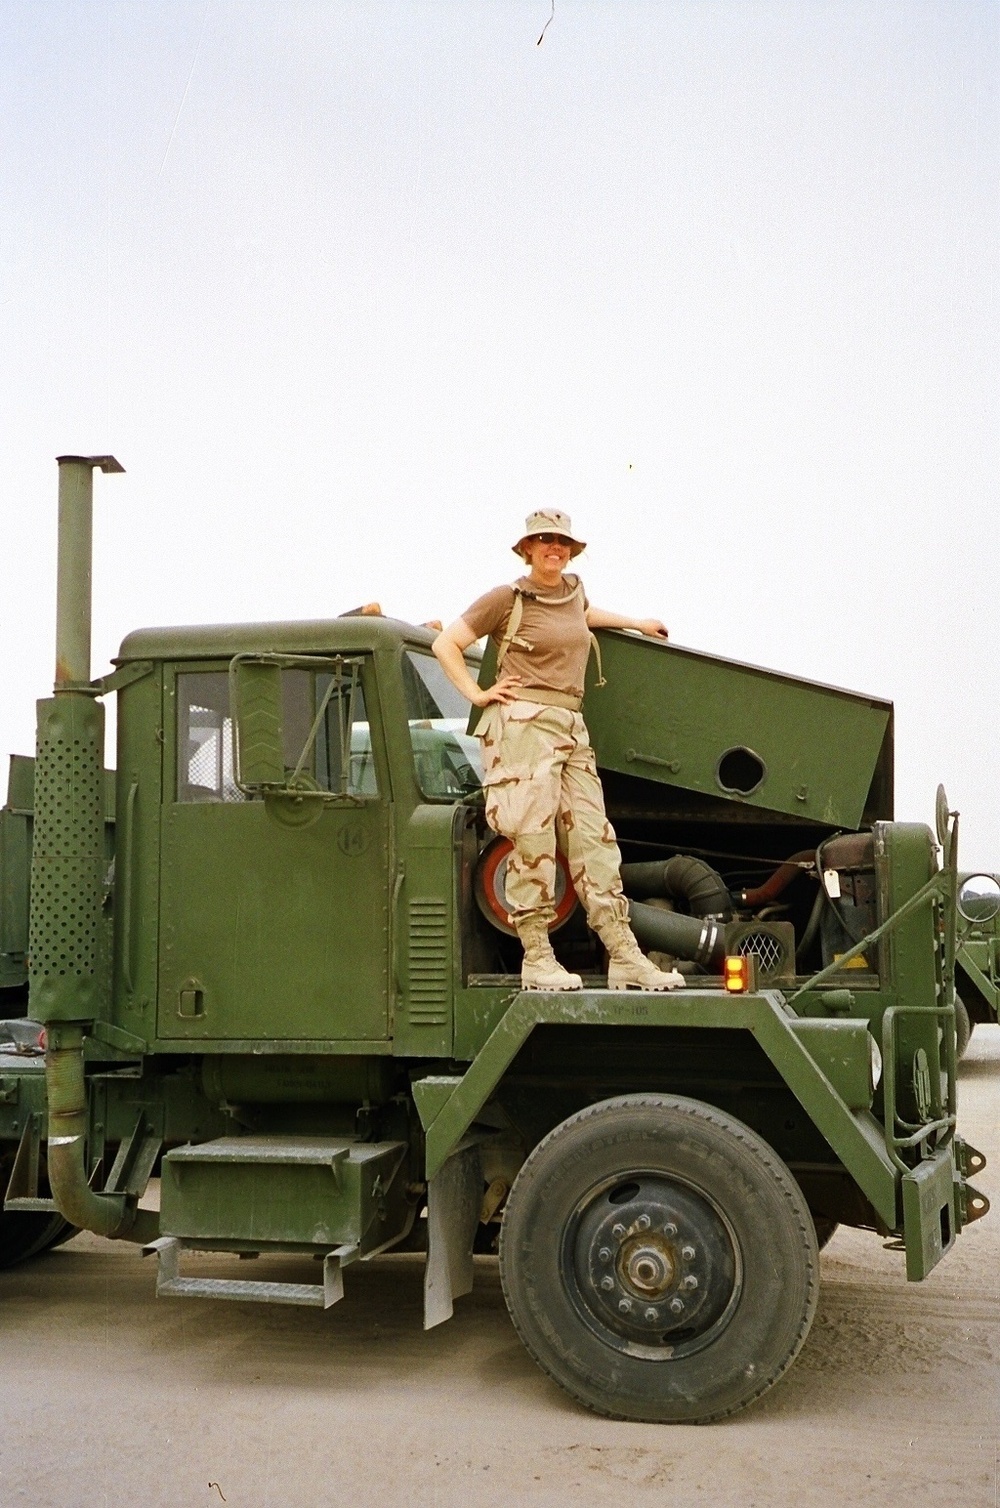 Old Roads Revisited: A Soldier Reflects on Her 2004 Deployment to Iraq